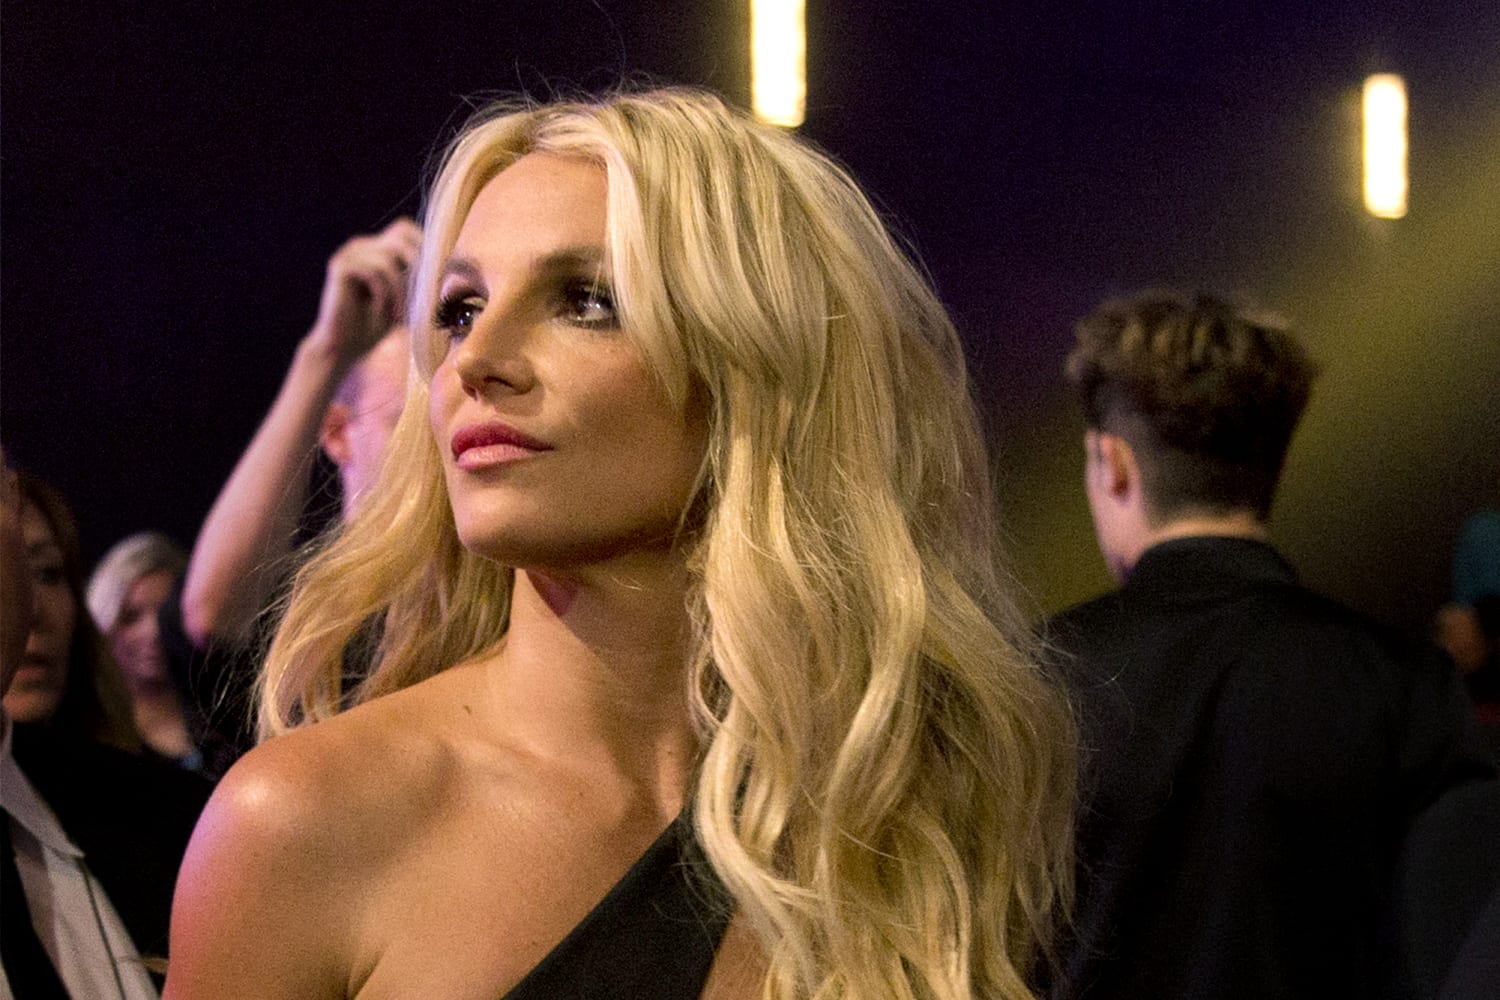 Judge refuses to move up hearing on removing Britney Spears' father from conservatorship